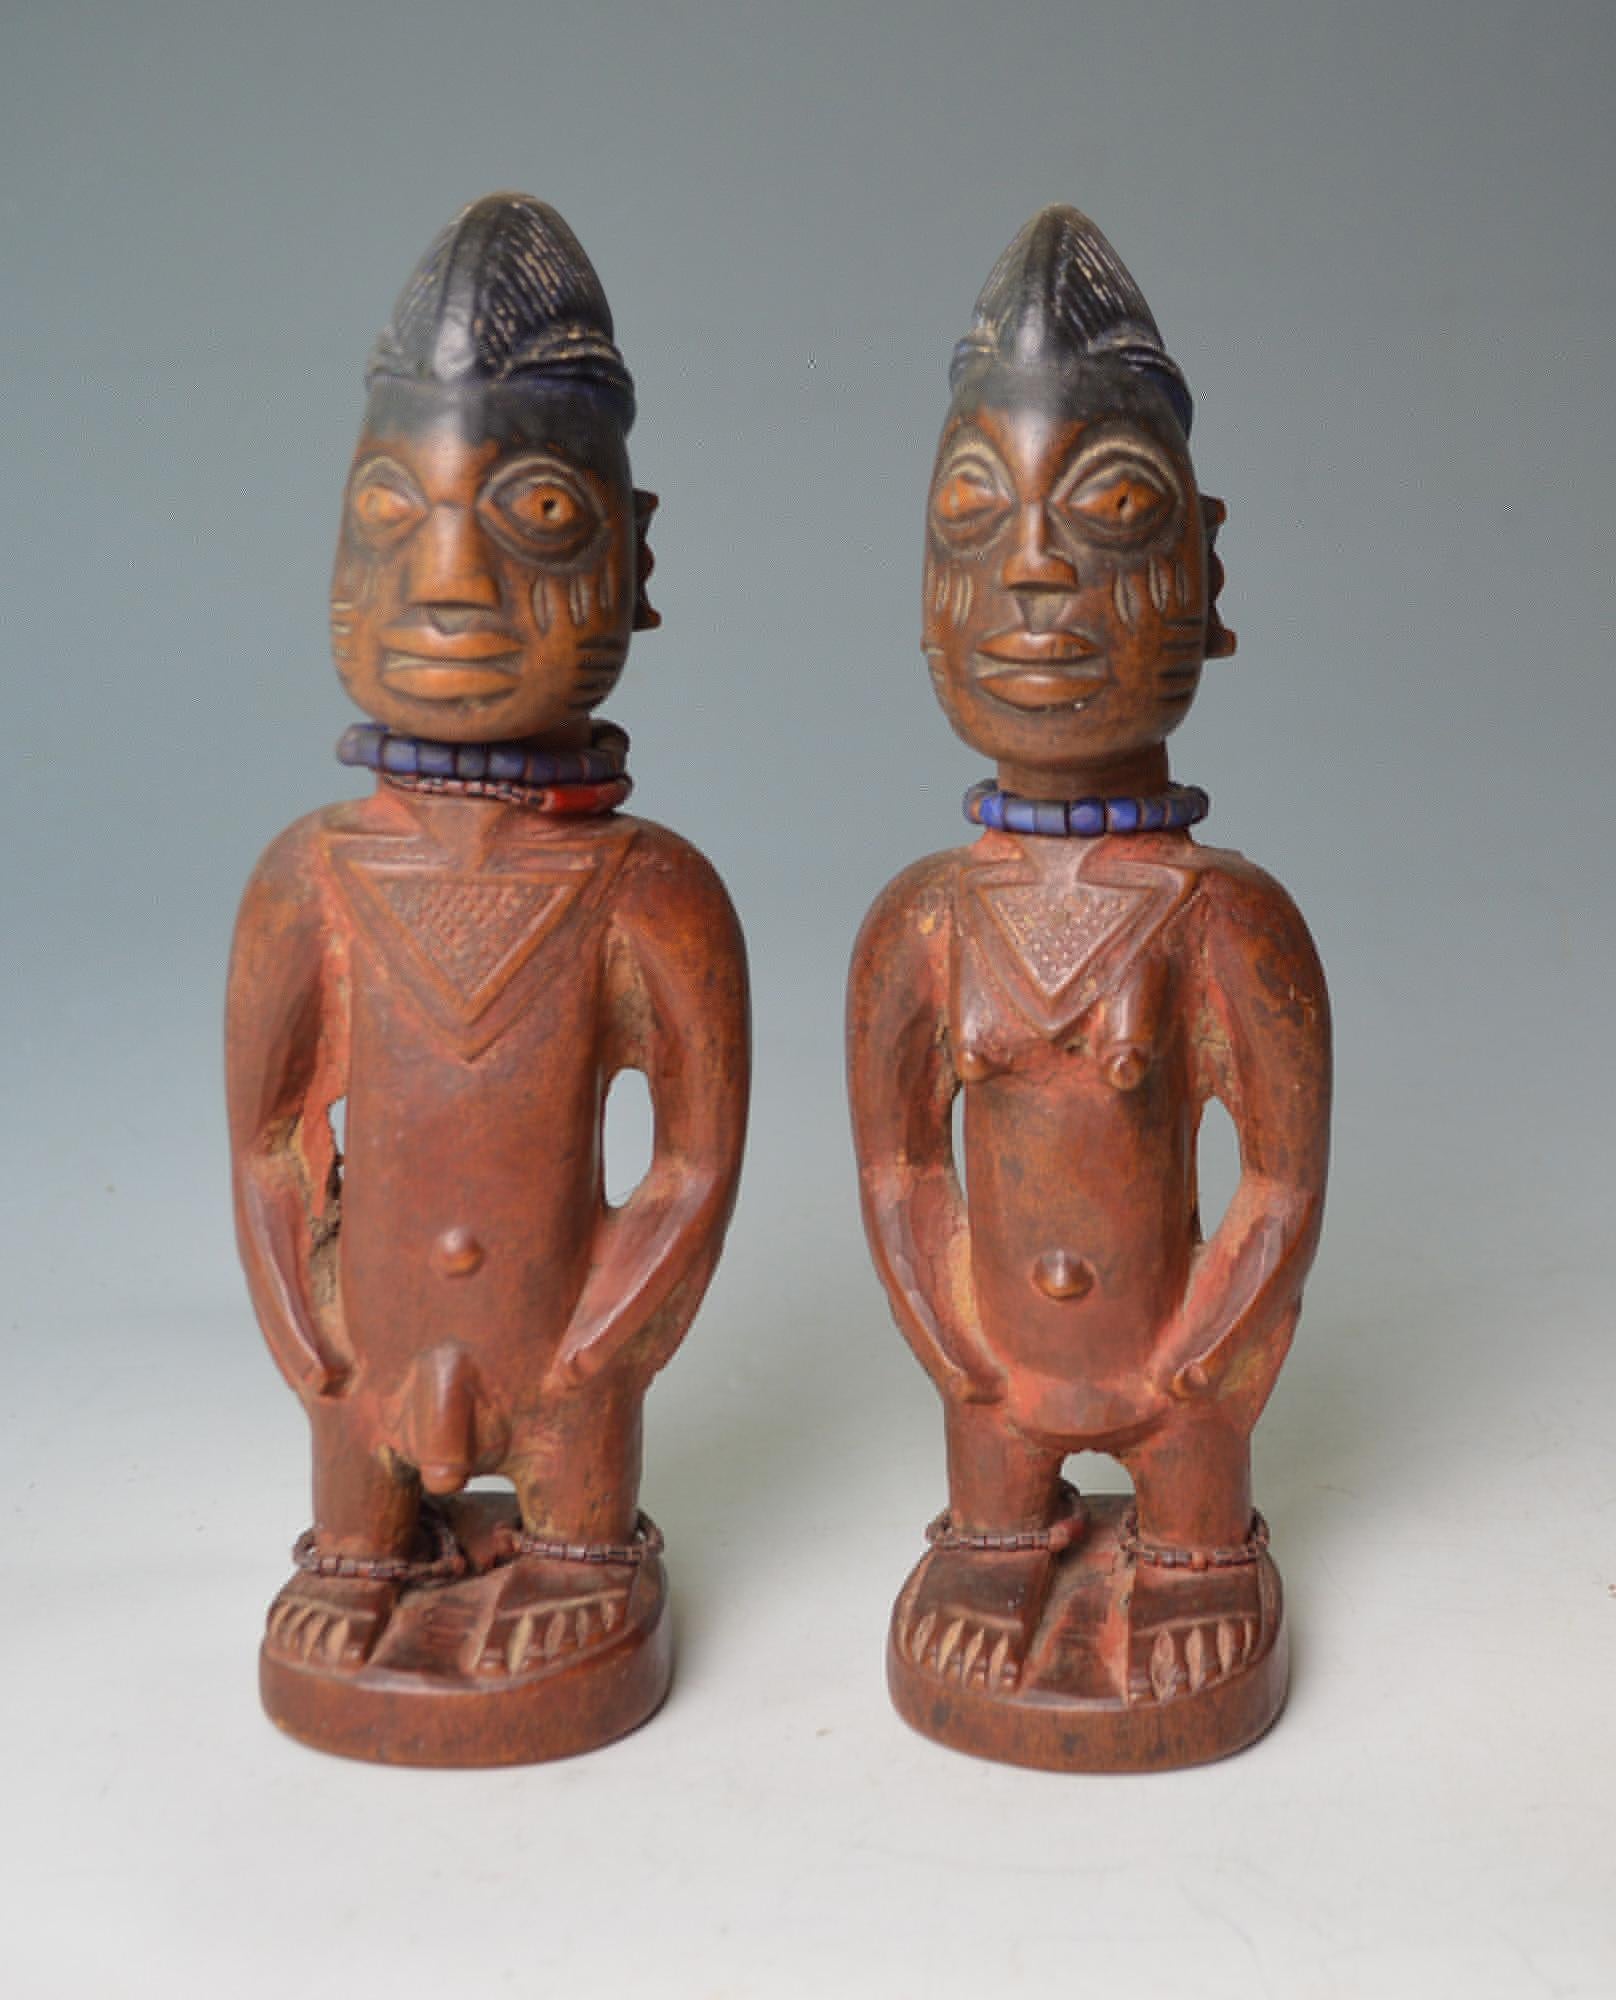 A fine Pair or Yoruba Ere Ibeji Figures Nigeria

A male and female pair of Ibeji Figures with Islamic Tirah necklaces

Period Early 20th Century Height 11 inches 28 cm

Ex German collection
 
Ibeji figures are small commemorative wood